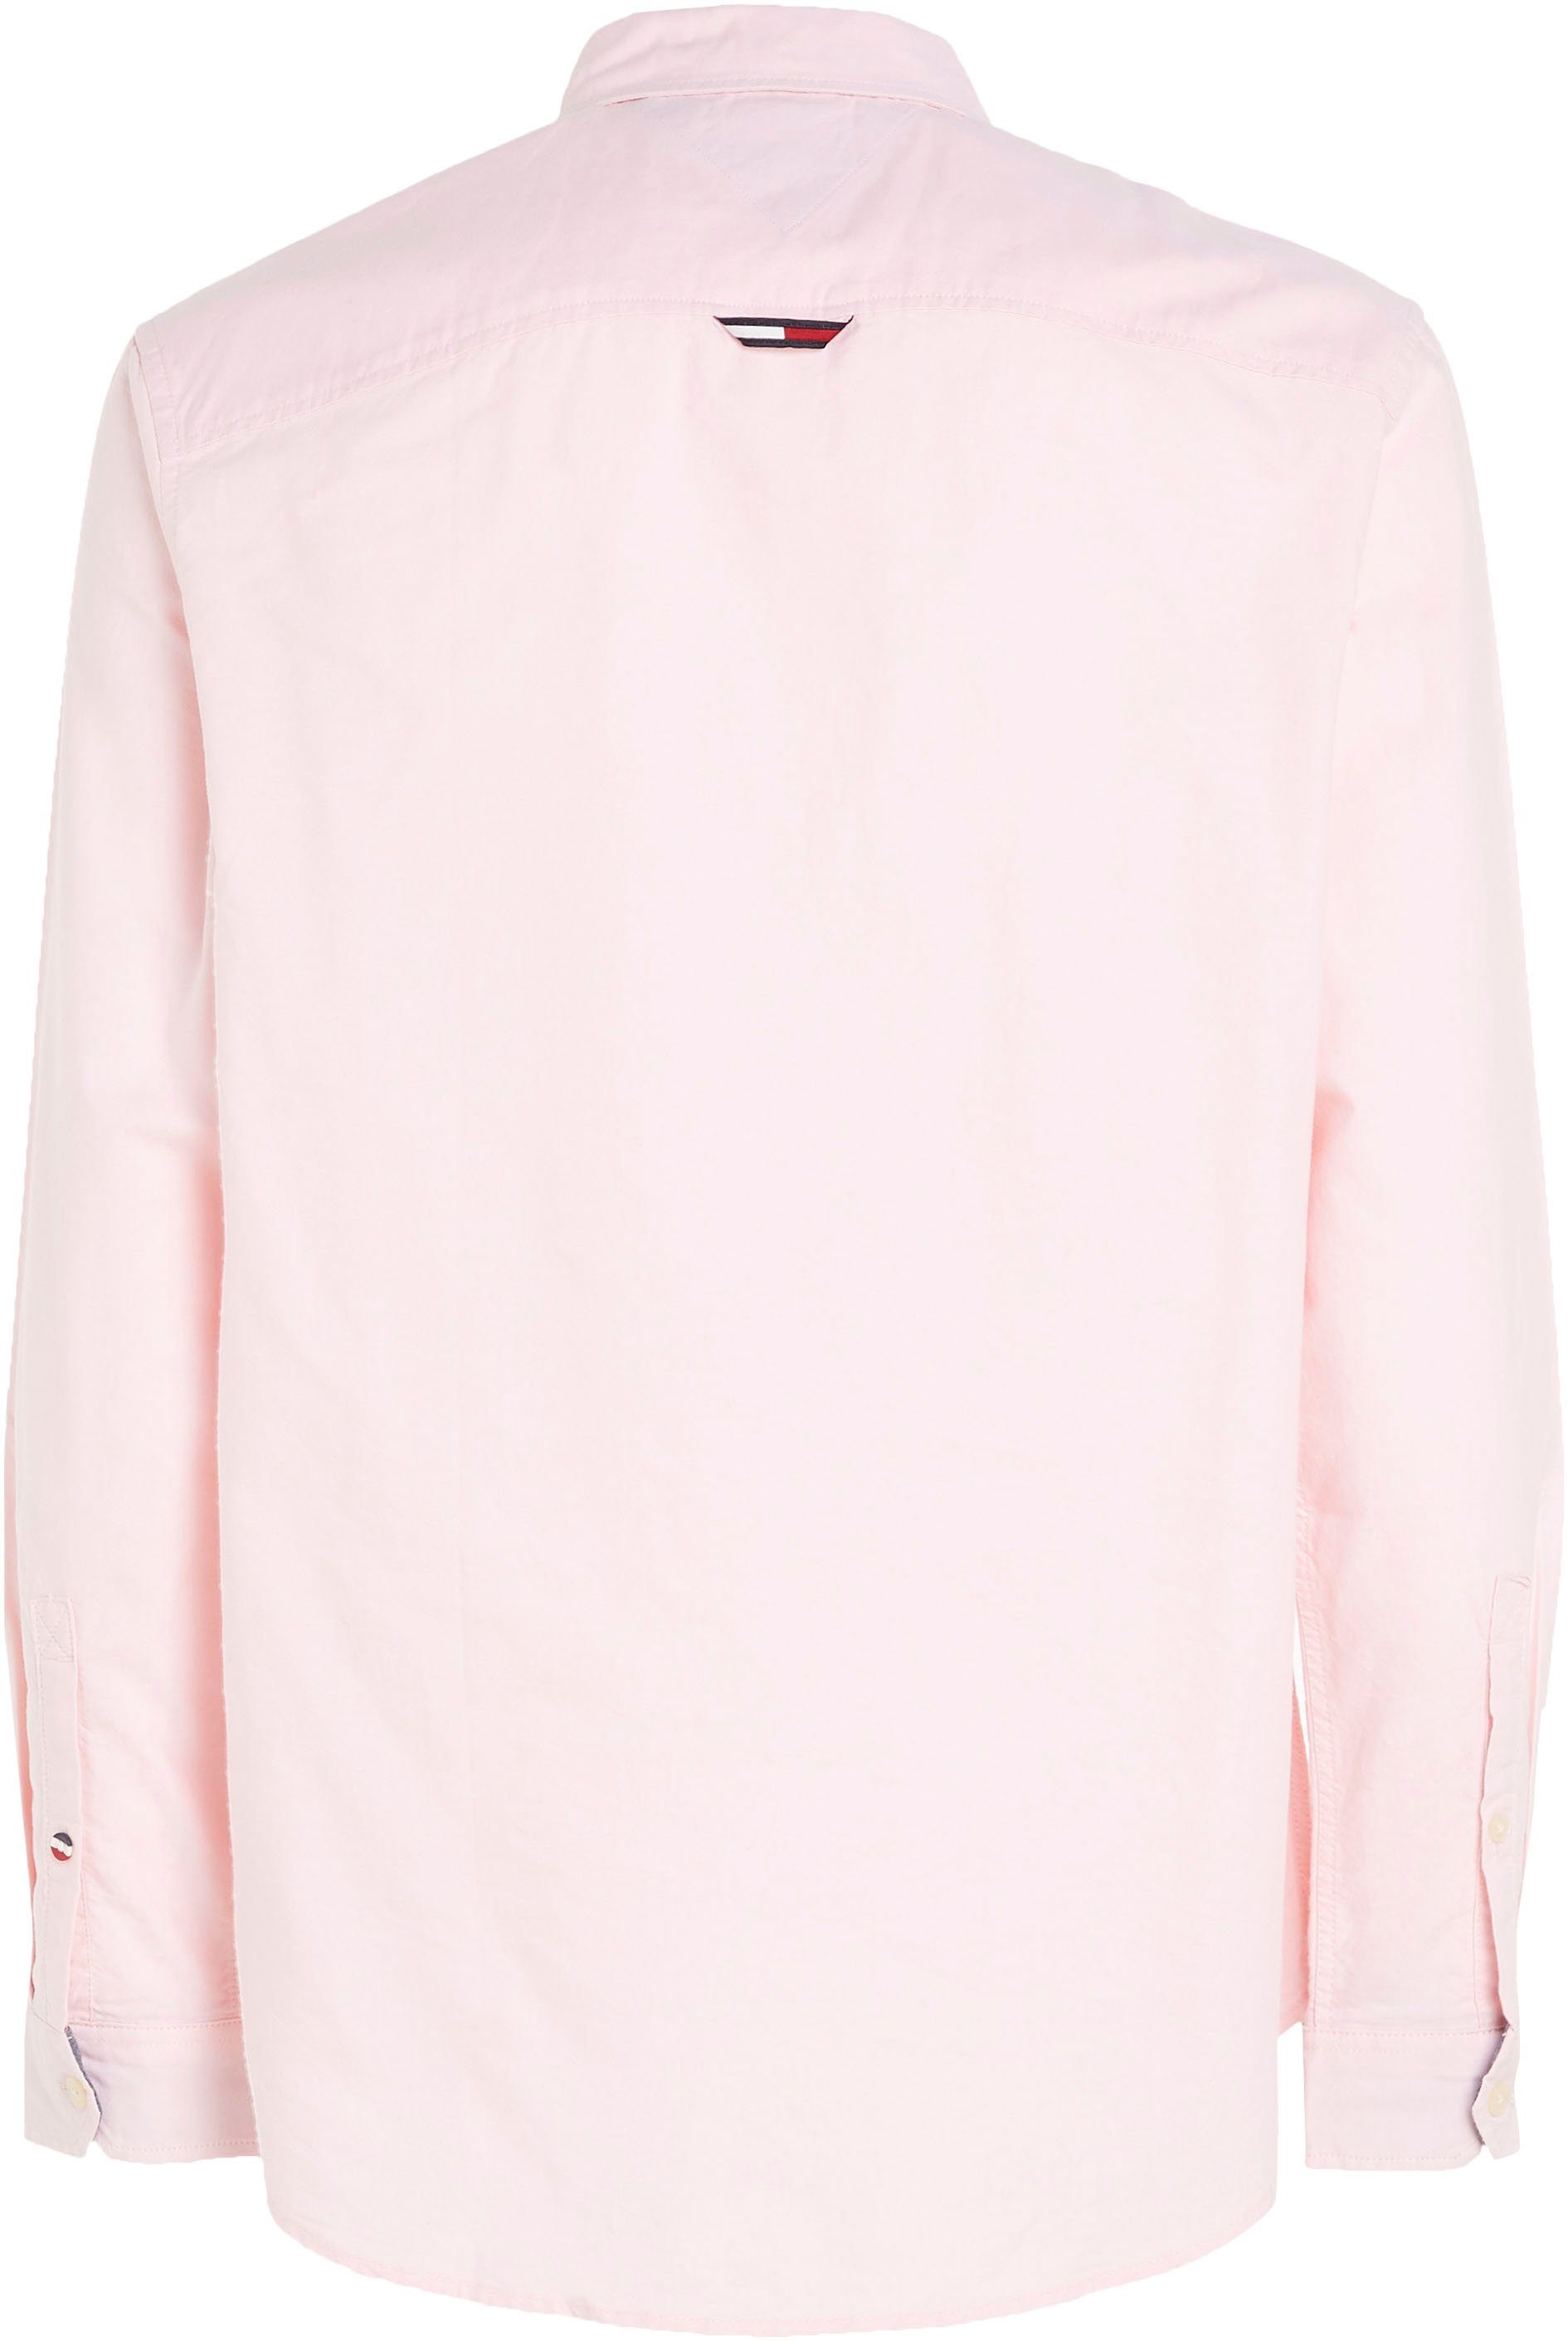 CLASSIC SHIRT mit Tommy OXFORD Langarmhemd Knopfleiste pink TJM Jeans